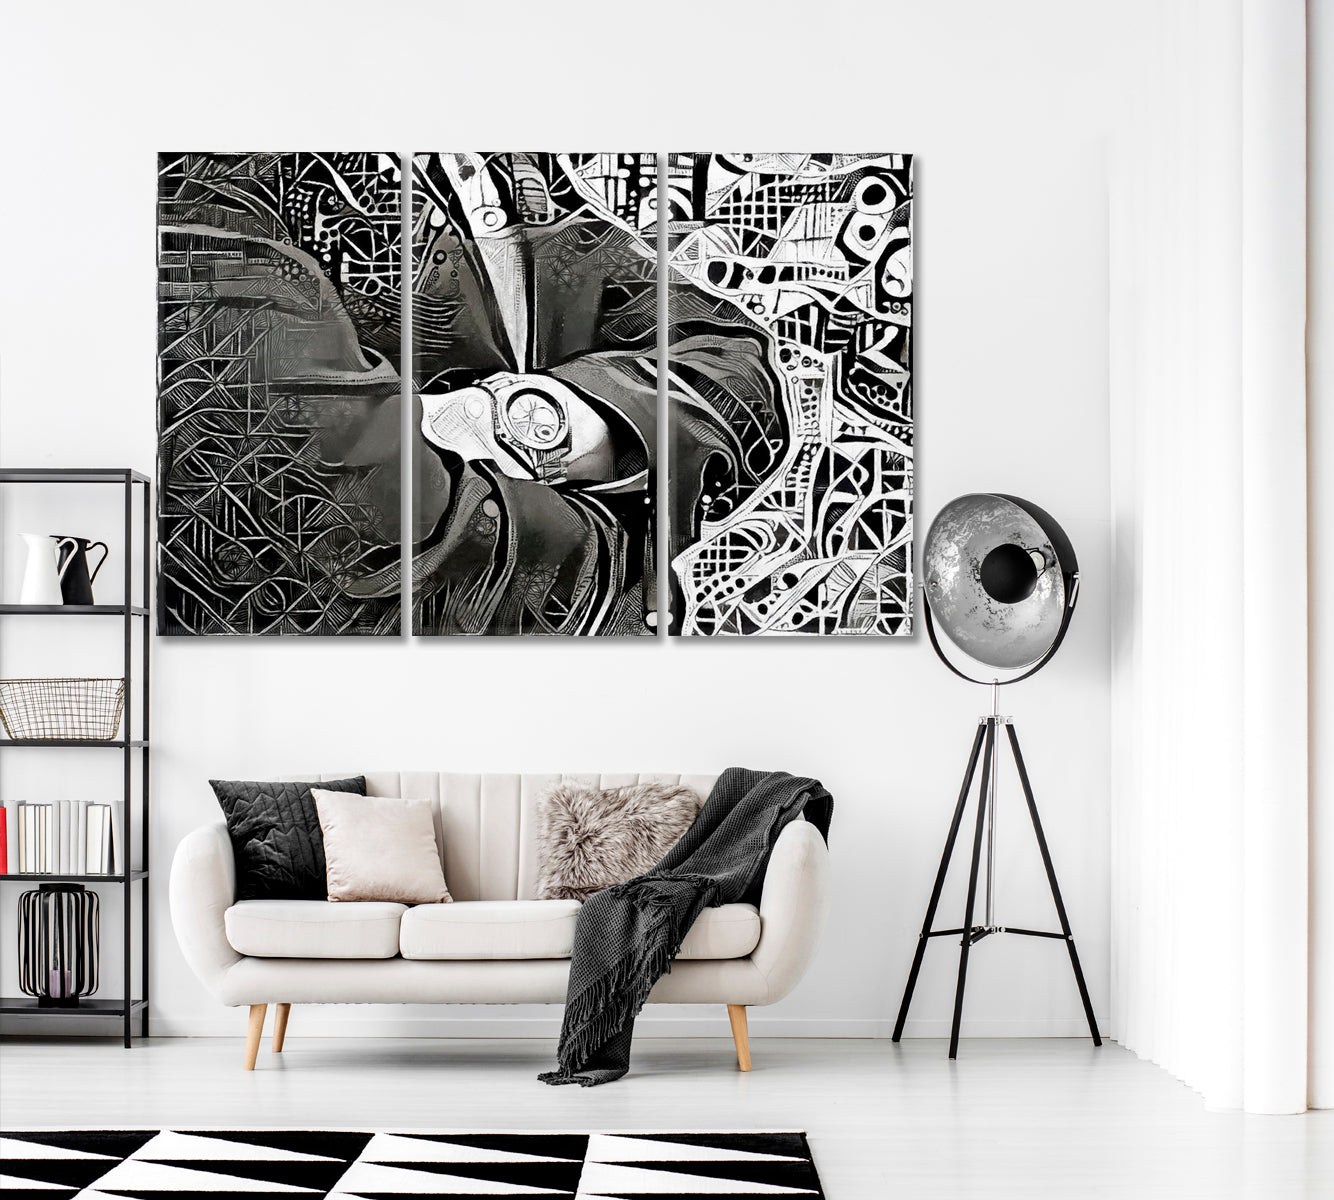 Monochrome Abstraction Businessman with Watch Canvas Print ArtLexy 3 Panels 36"x24" inches 